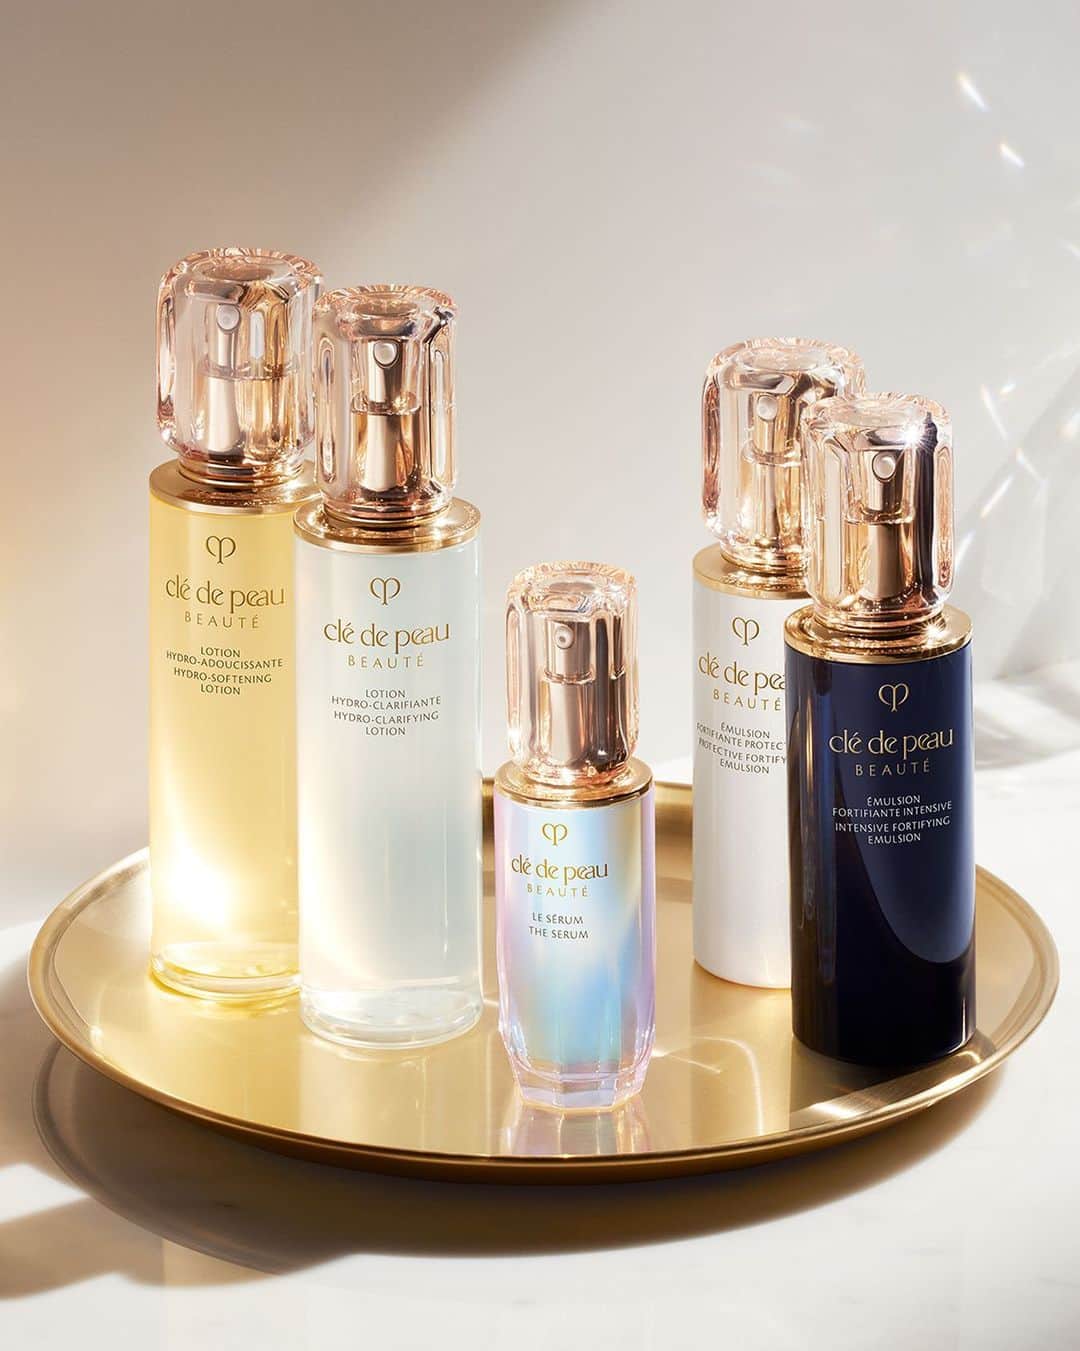 Clé de Peau Beauté Officialさんのインスタグラム写真 - (Clé de Peau Beauté OfficialInstagram)「Just as Rome wasn’t built in a day, beautiful skin isn’t achieved overnight. Consistency is vital in achieving long-term benefits. Thankfully, our 3-step #KeyRadianceCare routine makes pampering your skin so much easier.   Step 1: Start with #TheSerum, enriched with rare botanicals and potent antioxidants to awaken #SkinIntelligence.   Step 2: Apply #TheLotion, available in two formulas to meet different skin needs.   Step 3: Round off the routine with #ProtectiveFortifyingEmulsion (day) or the #IntensiveFortifyingEmulsion (night).   Remember, a skincare ritual is not a mundane routine; it's a commitment to your skin's wellbeing 🤍 Here’s to a radiant new you!    「ローマは一日にして成らず」と言われるように、美しい肌も一朝一夕には手に入りません。効果を感じ続けるためには、継続が不可欠です。 3 ステップの #キーラディアンスケア 習慣で、毎日のお手入れがとても簡単になります。  ステップ１：独自成分であるスキンイルミネイター*を配合したクレ・ド・ポ ボーテ #ルセラム （医薬部外品）で #肌の知性 **を目覚めさせましょう。 ステップ２：クレ・ド・ポー ボーテ #ローションイドロＡｎ （医薬部外品）またはクレ・ド・ポー ボーテ #ローションイドロＣｎ （医薬部外品）の化粧水で、肌を健やかに育みます。 ステップ 3：クレ・ド・ポー ボーテ #エマルションプロテクトゥリスｎ （医薬部外品）、またはクレ・ド・ポー ボーテ #クレームアンタンシヴｎ （医薬部外品）でお手入れを締めくくります。  毎日のスキンケアは単なる習慣ではなく、肌へご褒美を与える特別な時間です。輝き続ける肌を目指しましょう！  *スキンイルミネイター（保湿・整肌）配合（加水分解シルク、加水分解コンキオリン、テアニン、トウキエキス、シソエキス、グリシン、グリセリン、PEG/PPG- 17/4 ジメチルエーテル、トレハロース） **「肌の知性」とは、すべての人が生まれながらにそなえている、生涯美しい輝きを保ち続けるための鍵です」9月22日 13時03分 - cledepeaubeaute